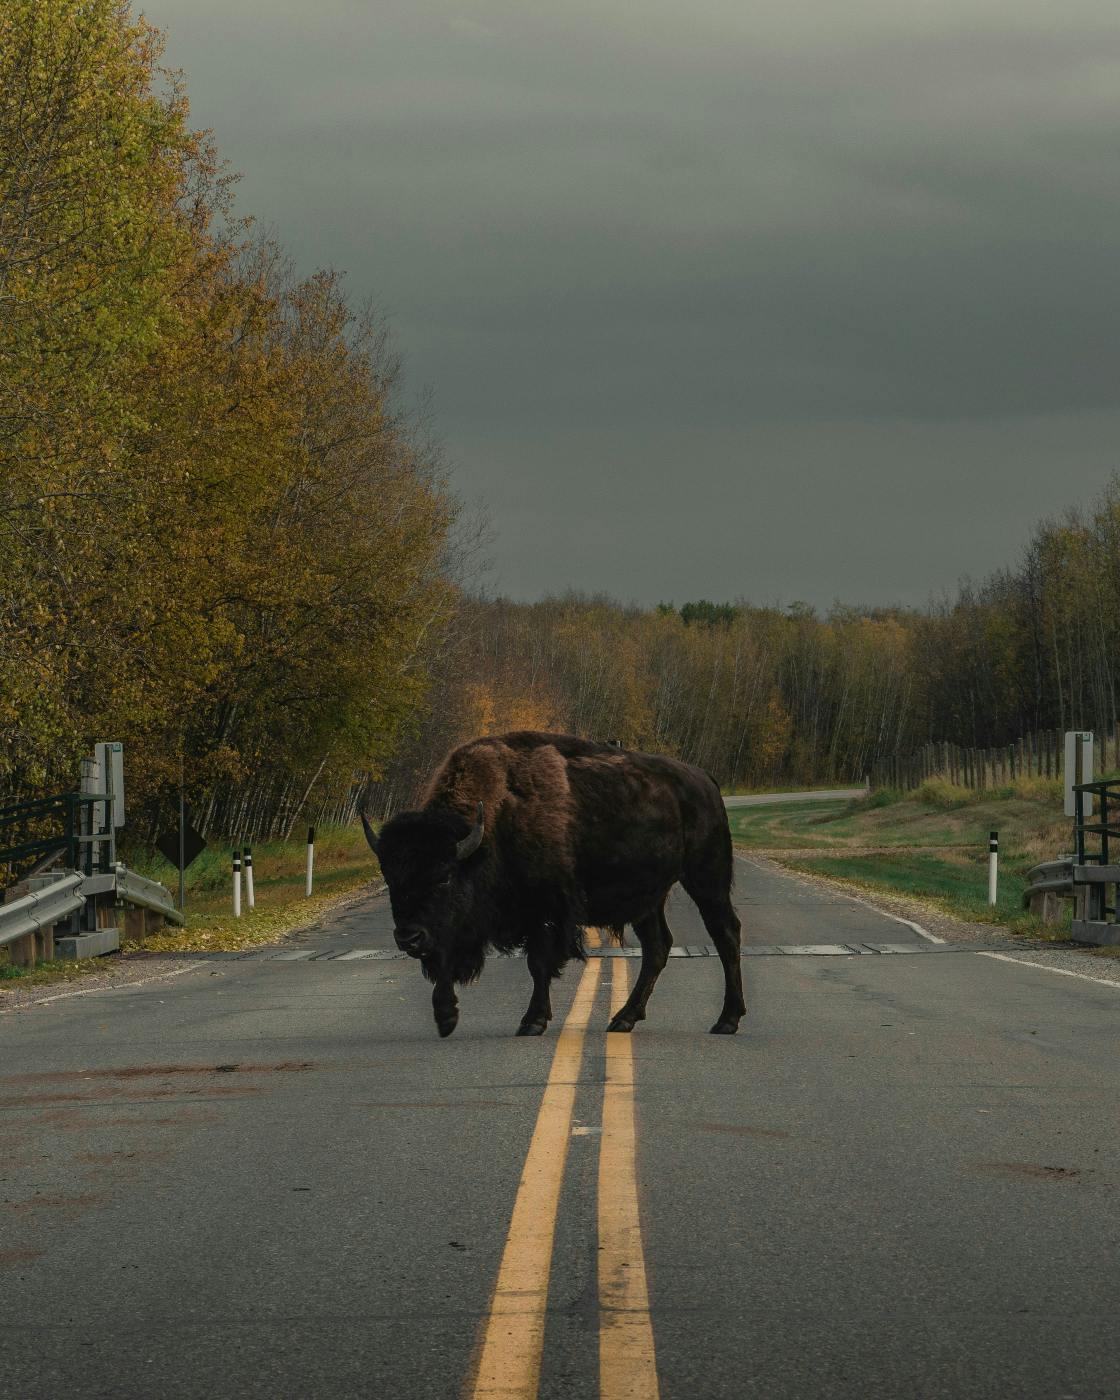 A large Buffalo standing in the middle of a road